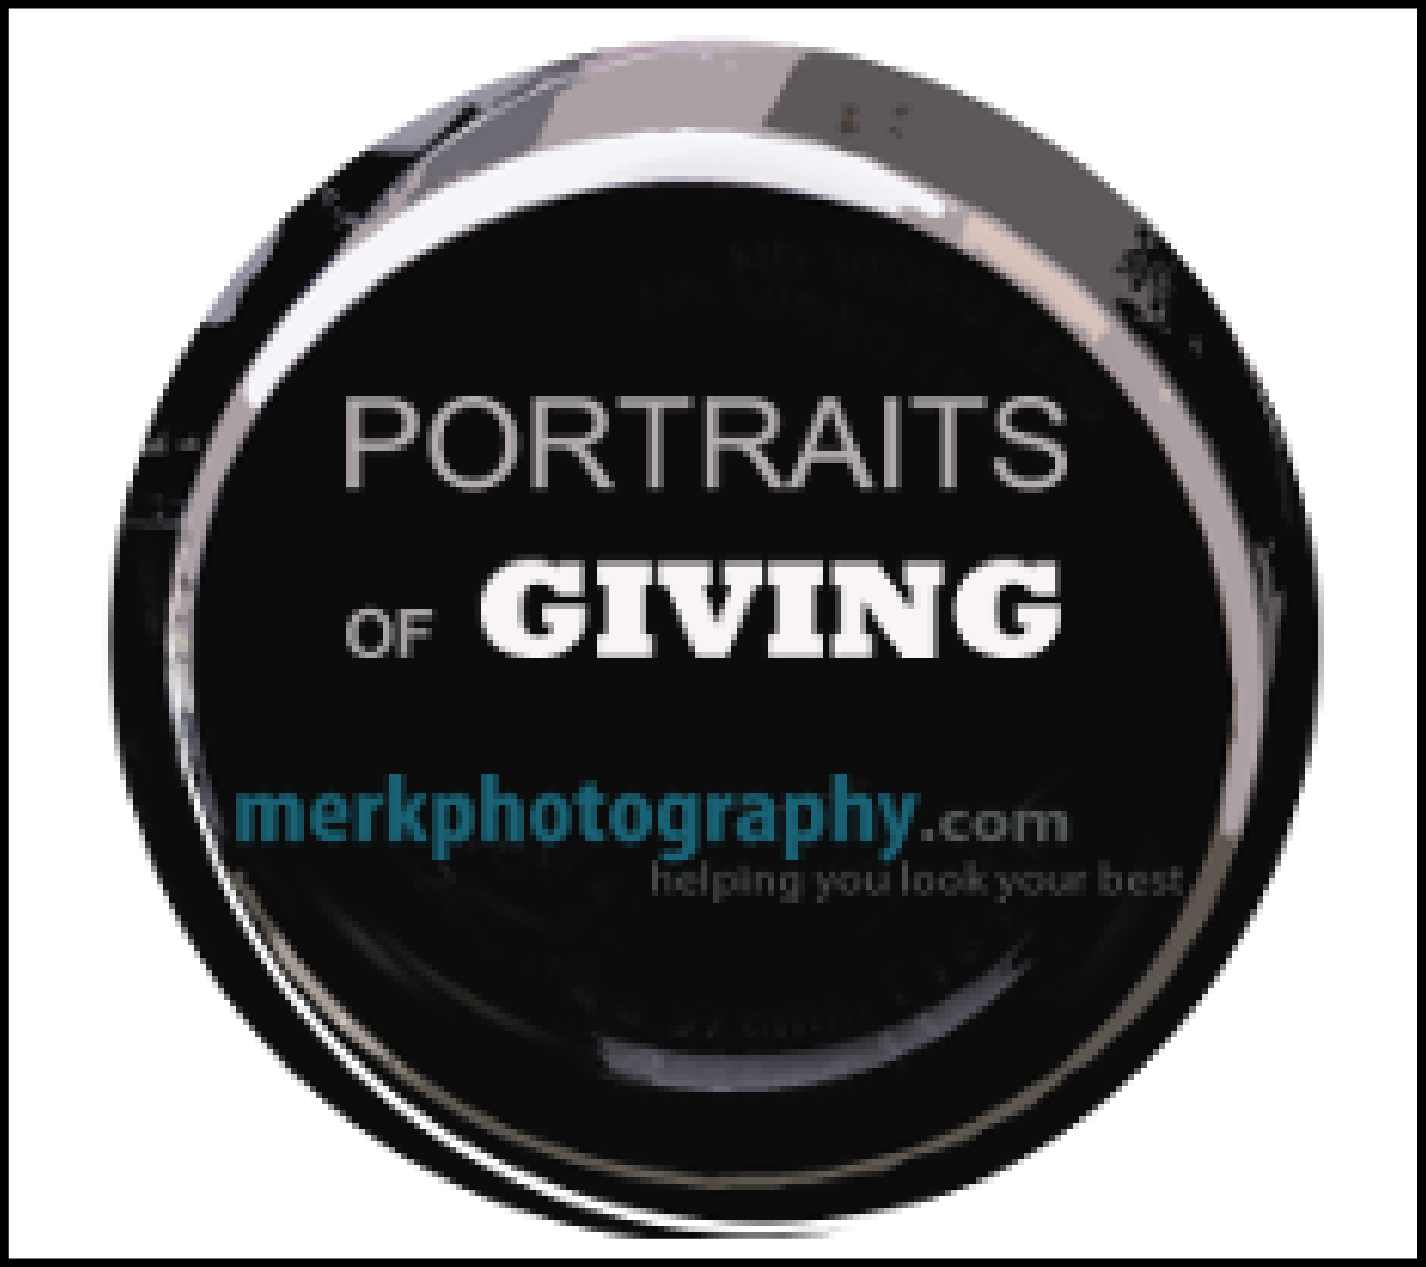 Portraits of giving